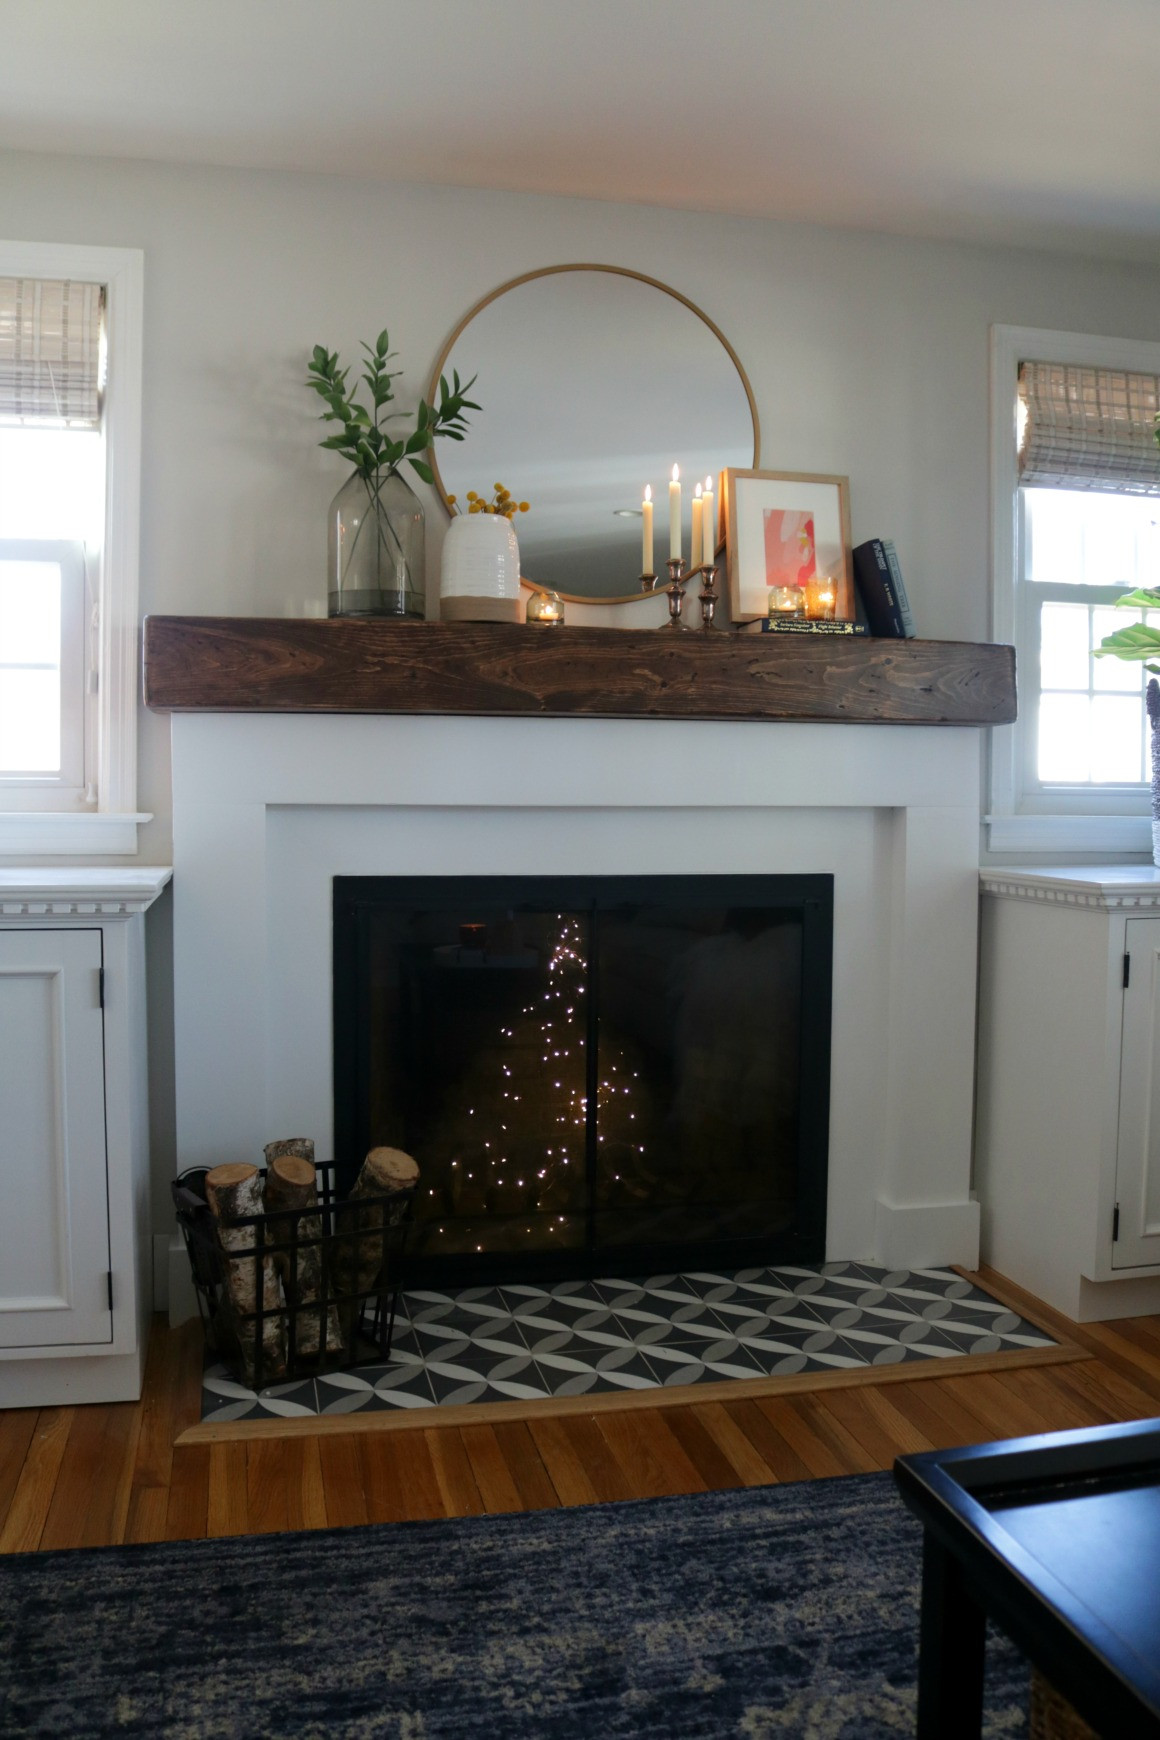 DIY Fireplace Decor
 Fireplace Makeover and Styled with Decor from Tar